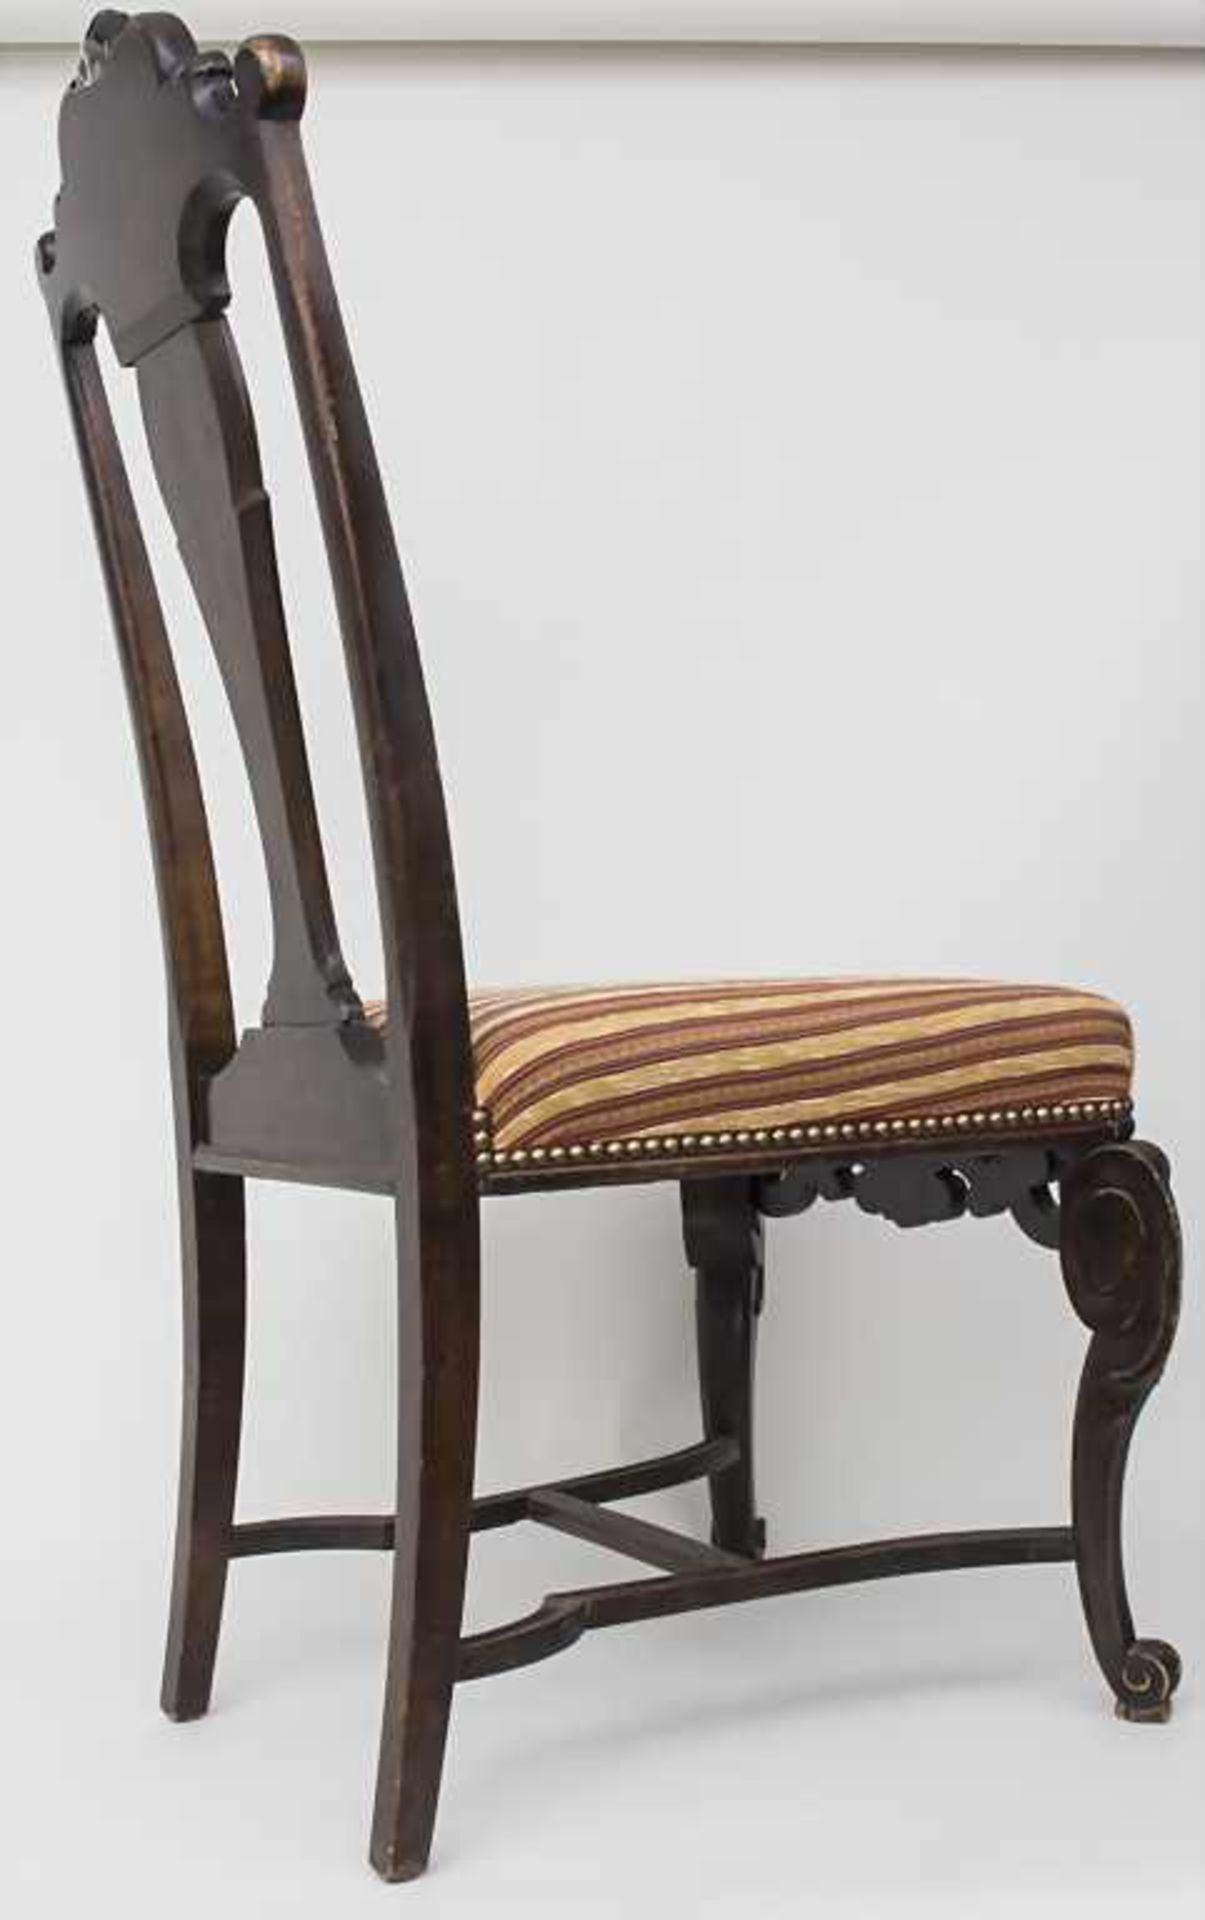 Paar Historismus-Stühle / A pair of historism chairs, 19. Jh.Material: Holz, dunkel gebeizt, - Image 3 of 5